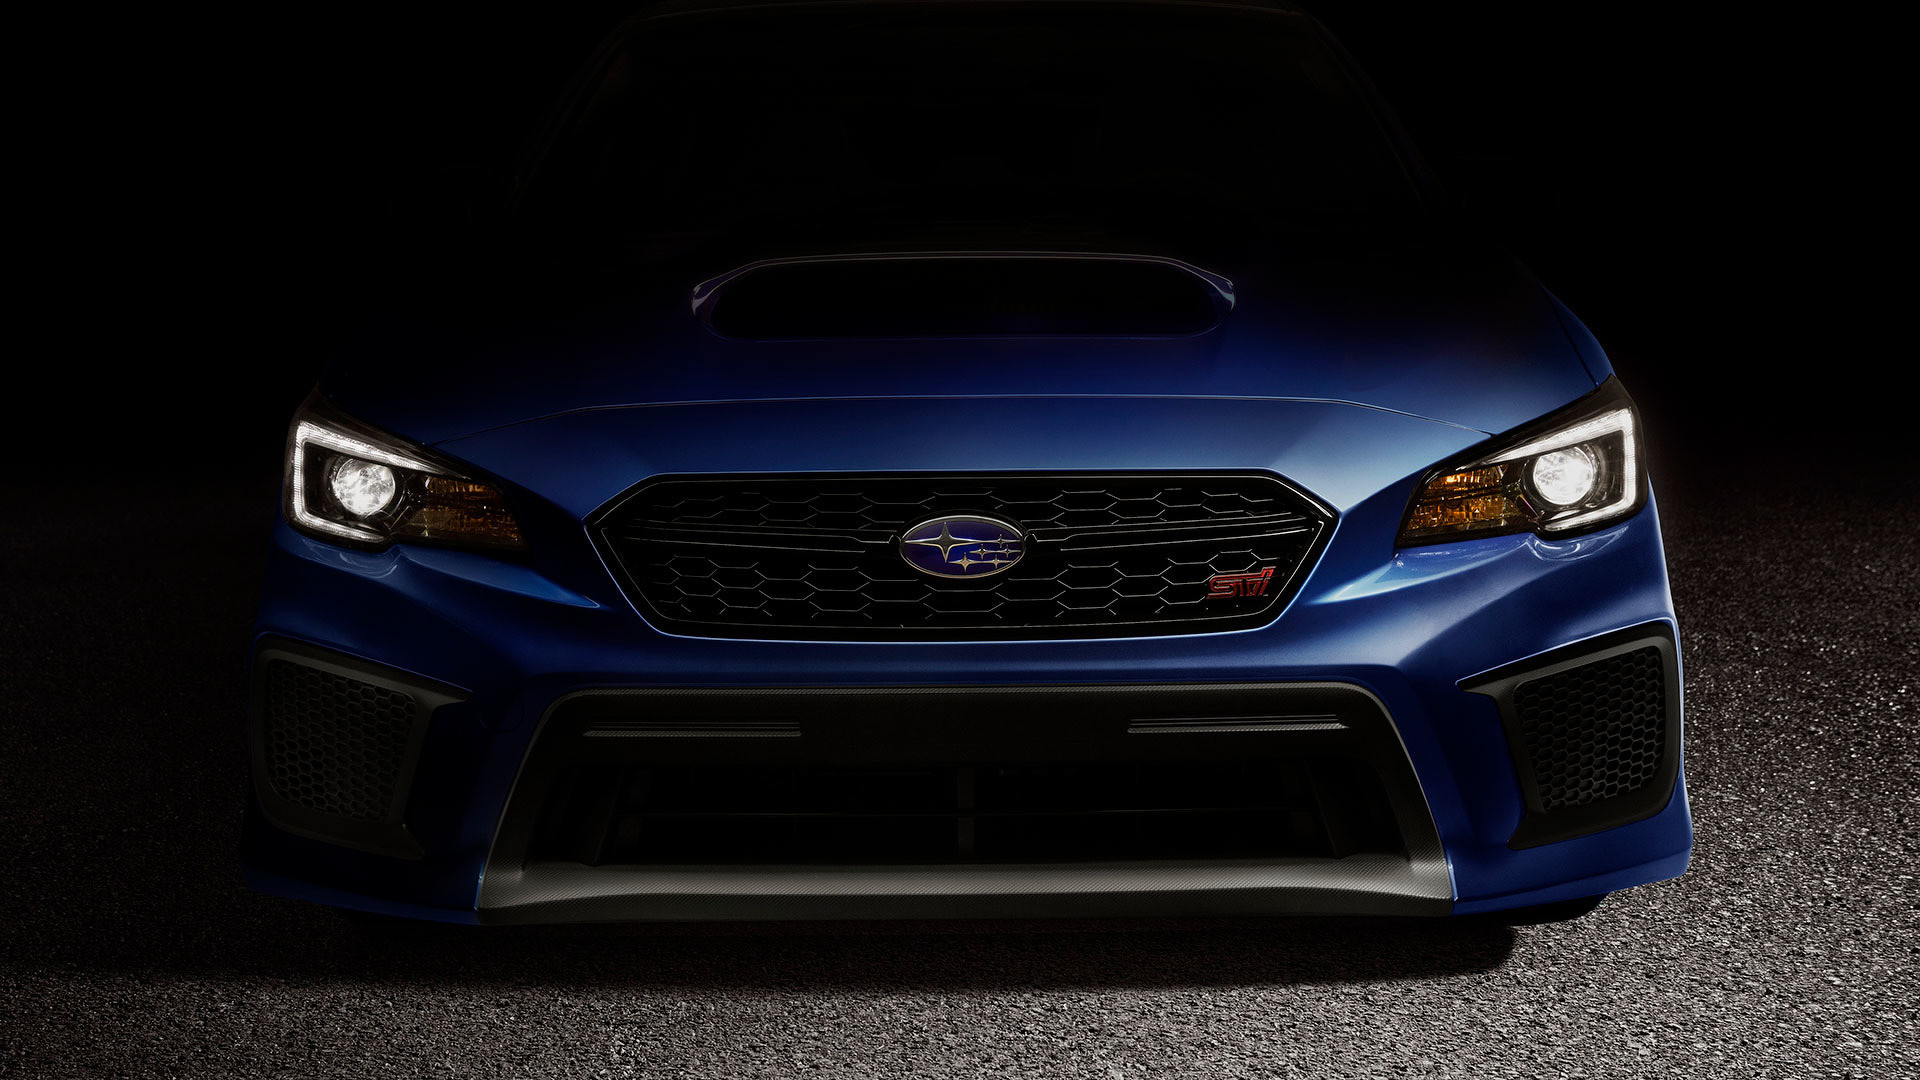 1920x1080 ... the WRX STI Type RA cabin features RecaroÂ® performance design front  seats with red bolsters and stitching as well as an embossed STI logo on  the ...